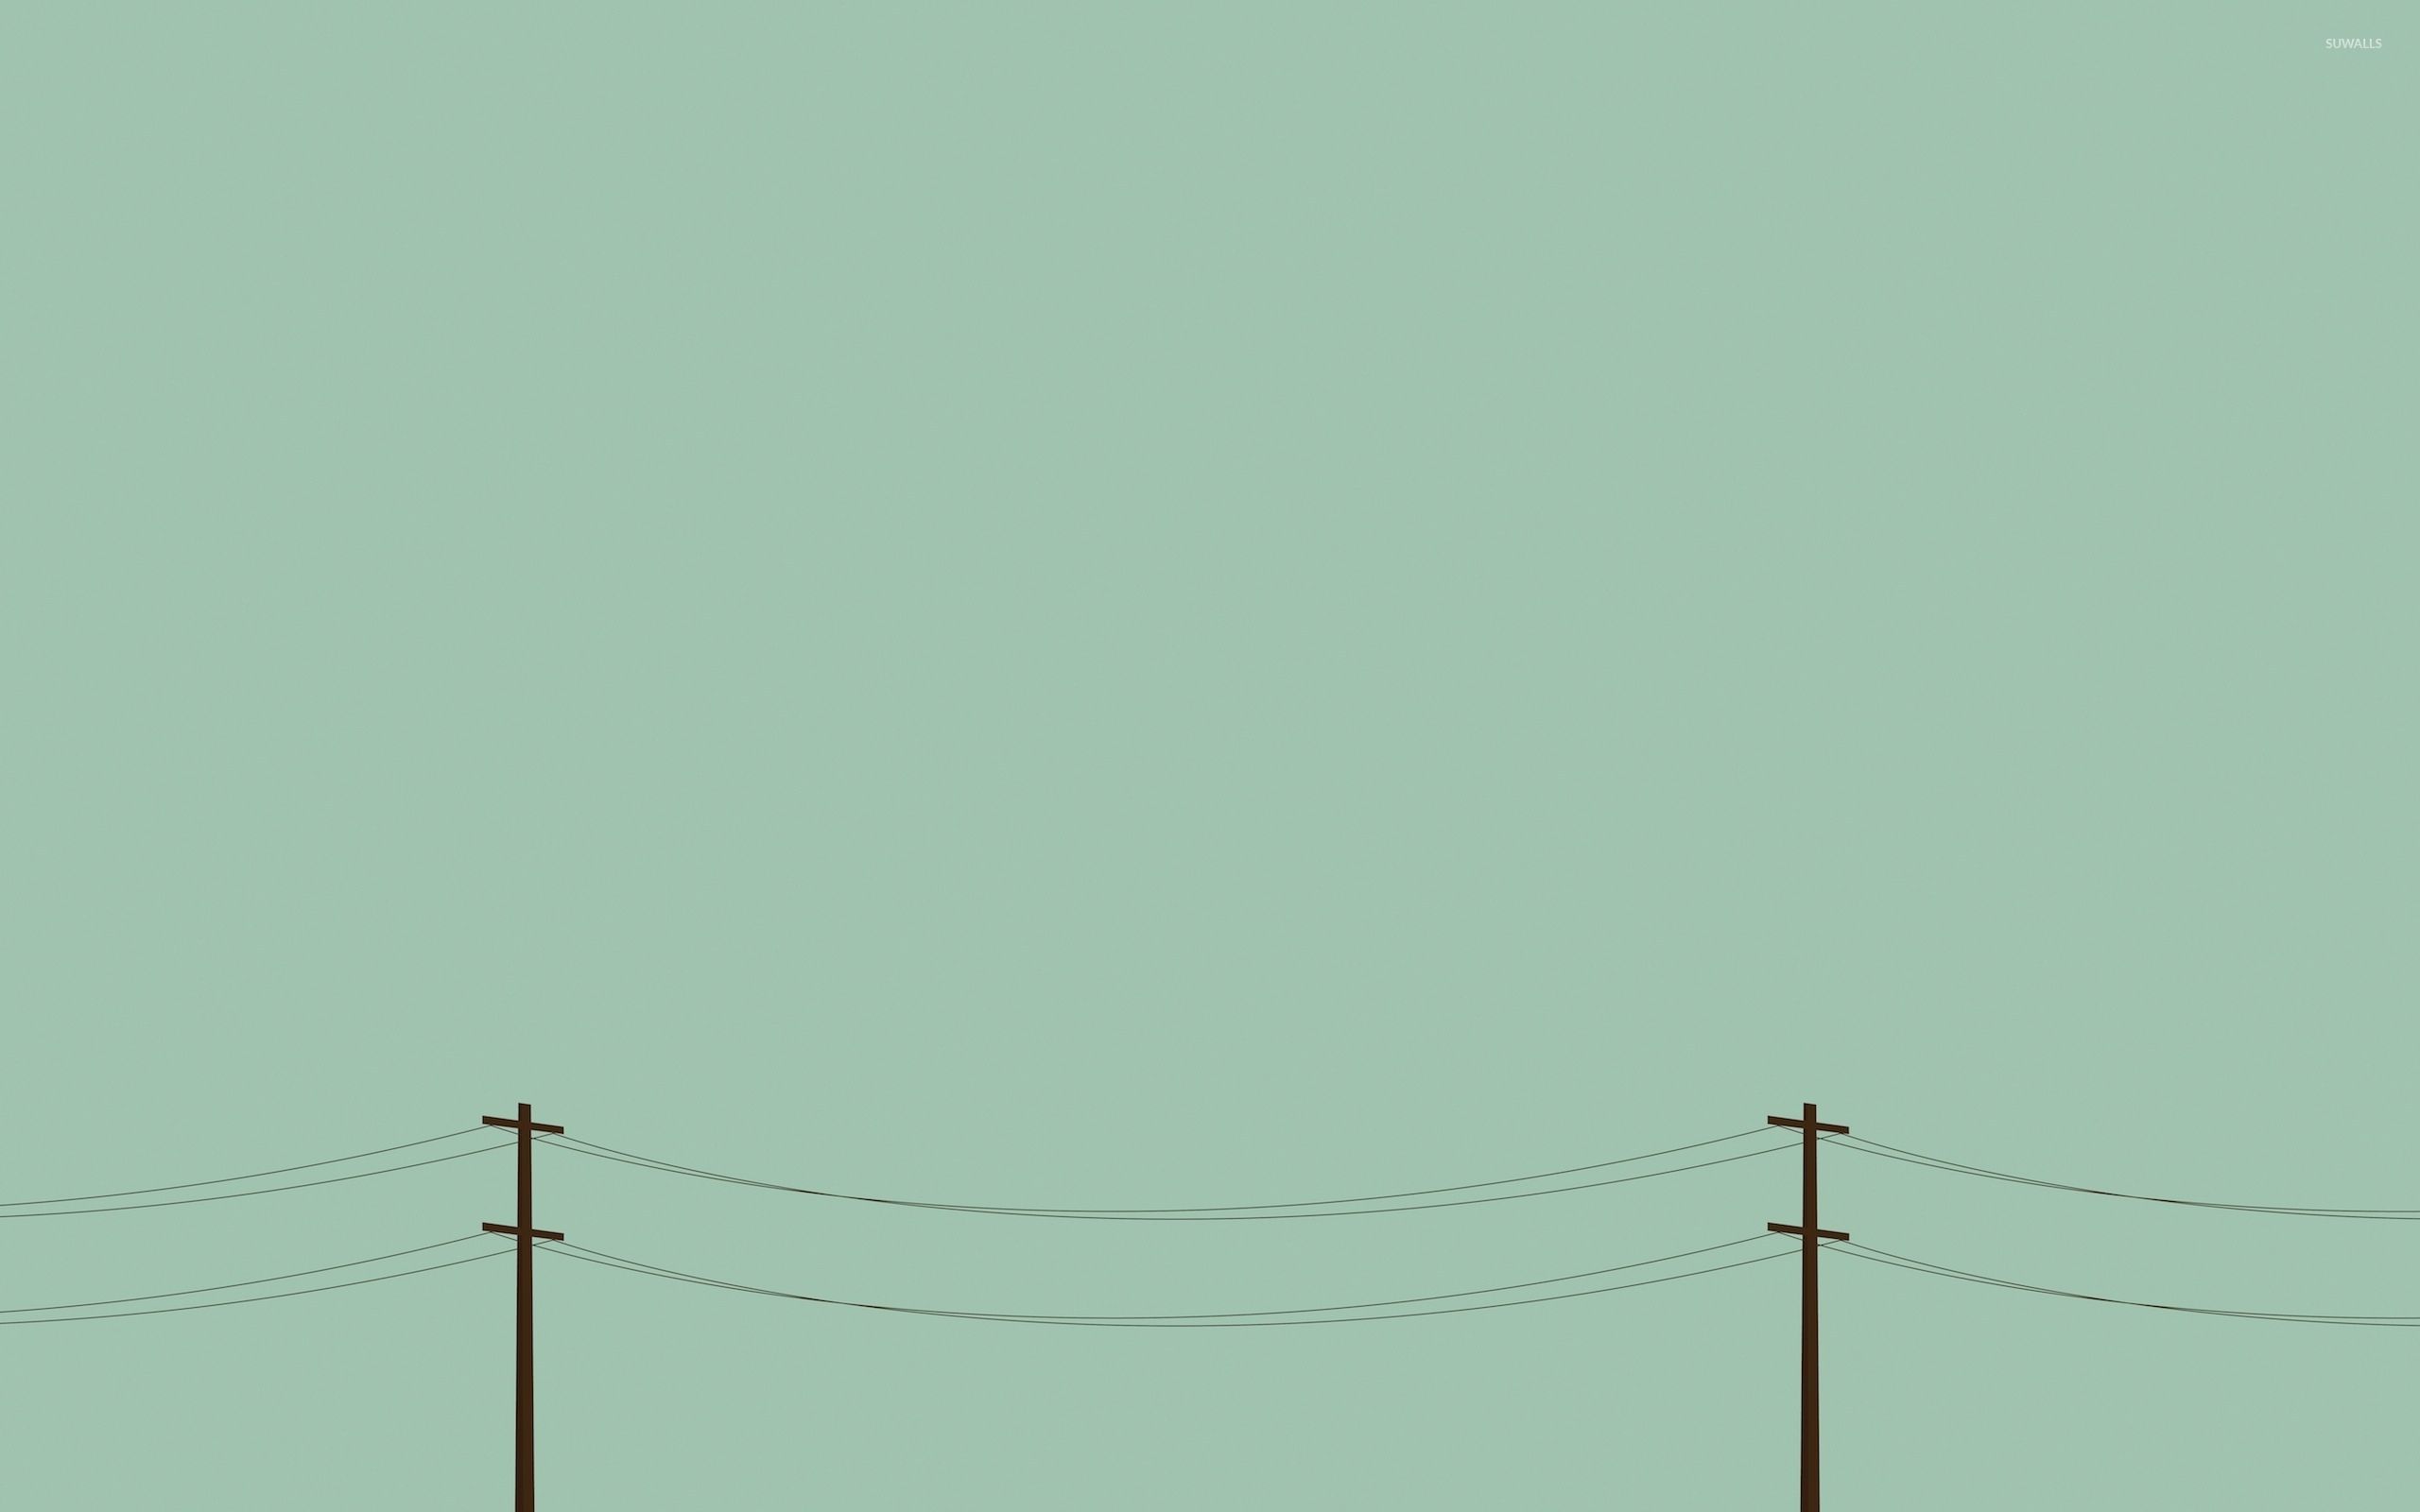 Two telephone poles on a green background - 2560x1600, sage green, minimalist